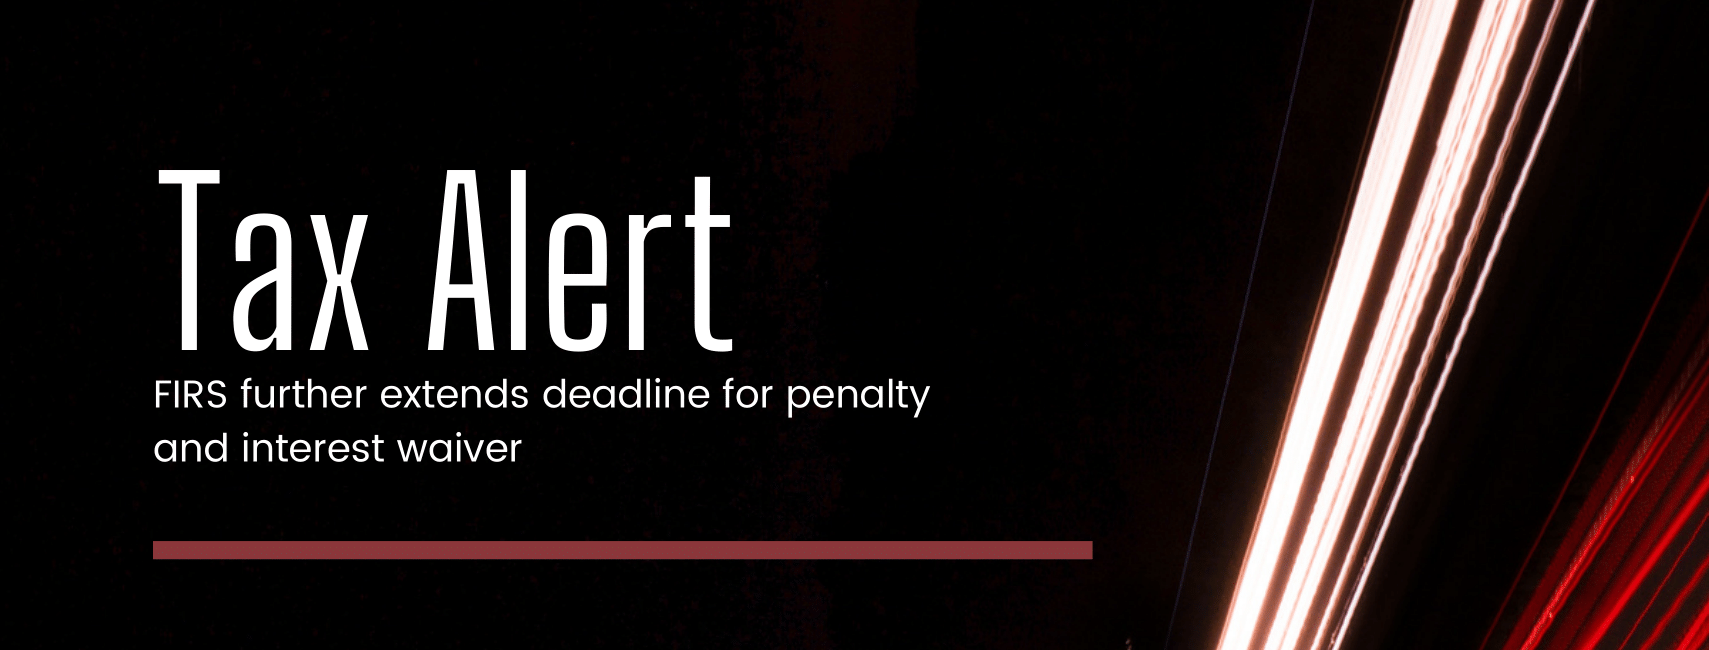 FIRS further extends the deadline on penalty and interest waiver till 31st December, 2020.